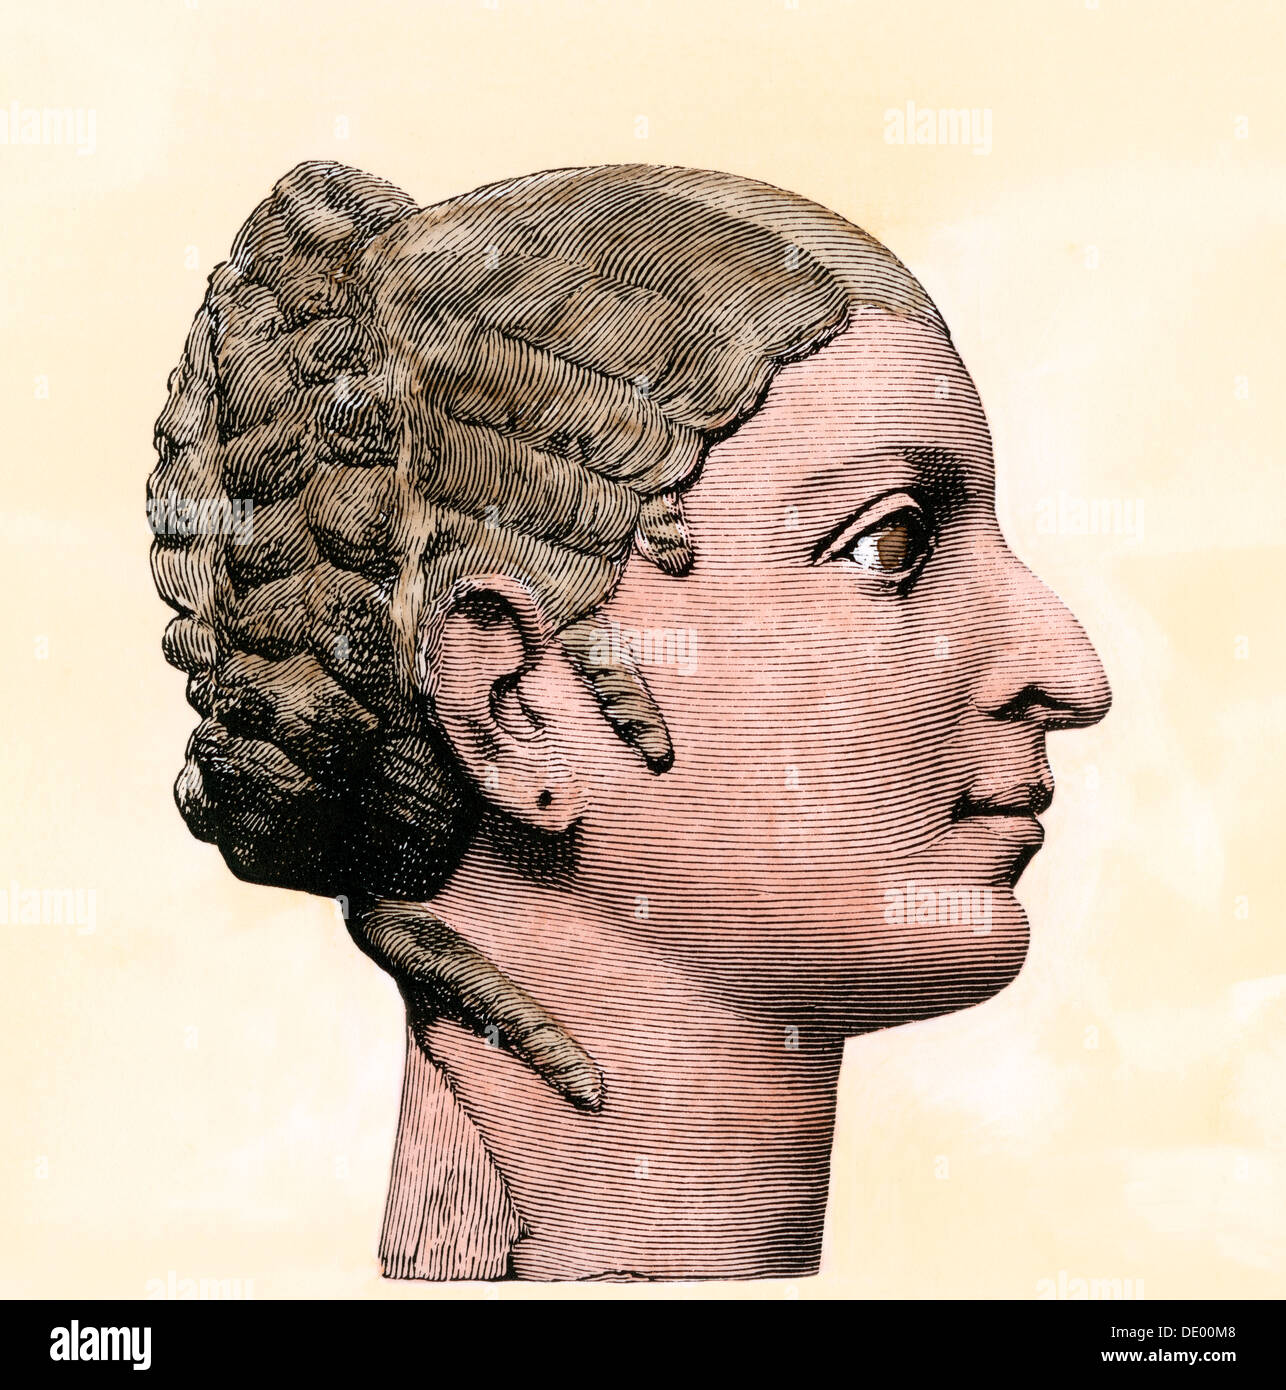 Portraits: Married to Ptolemy XIV - The Online Portrait Gallery